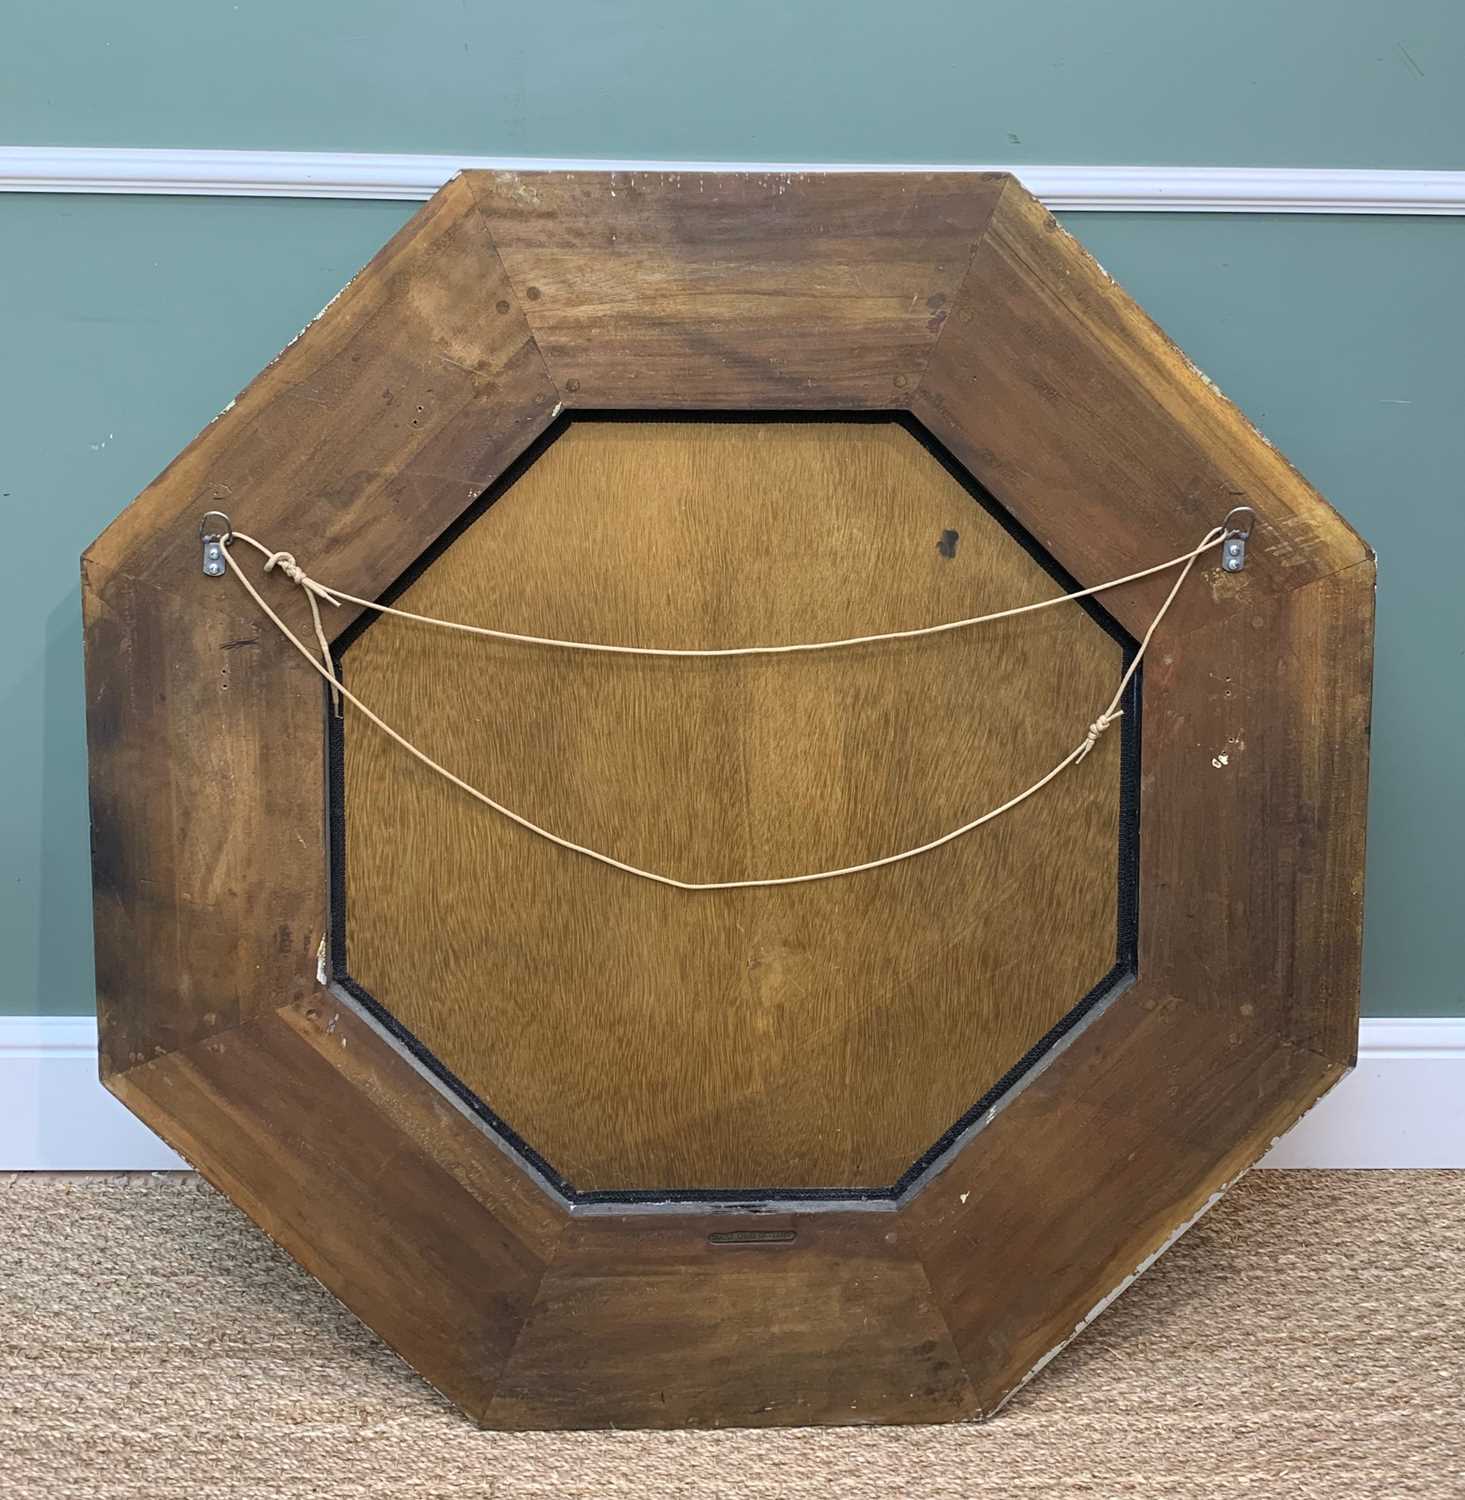 LARGE CONTEMPORARY CHRISTOPHER GUY OCTAGON MIRROR, black lacquer and gilt geometric surround, 103h x - Image 4 of 11